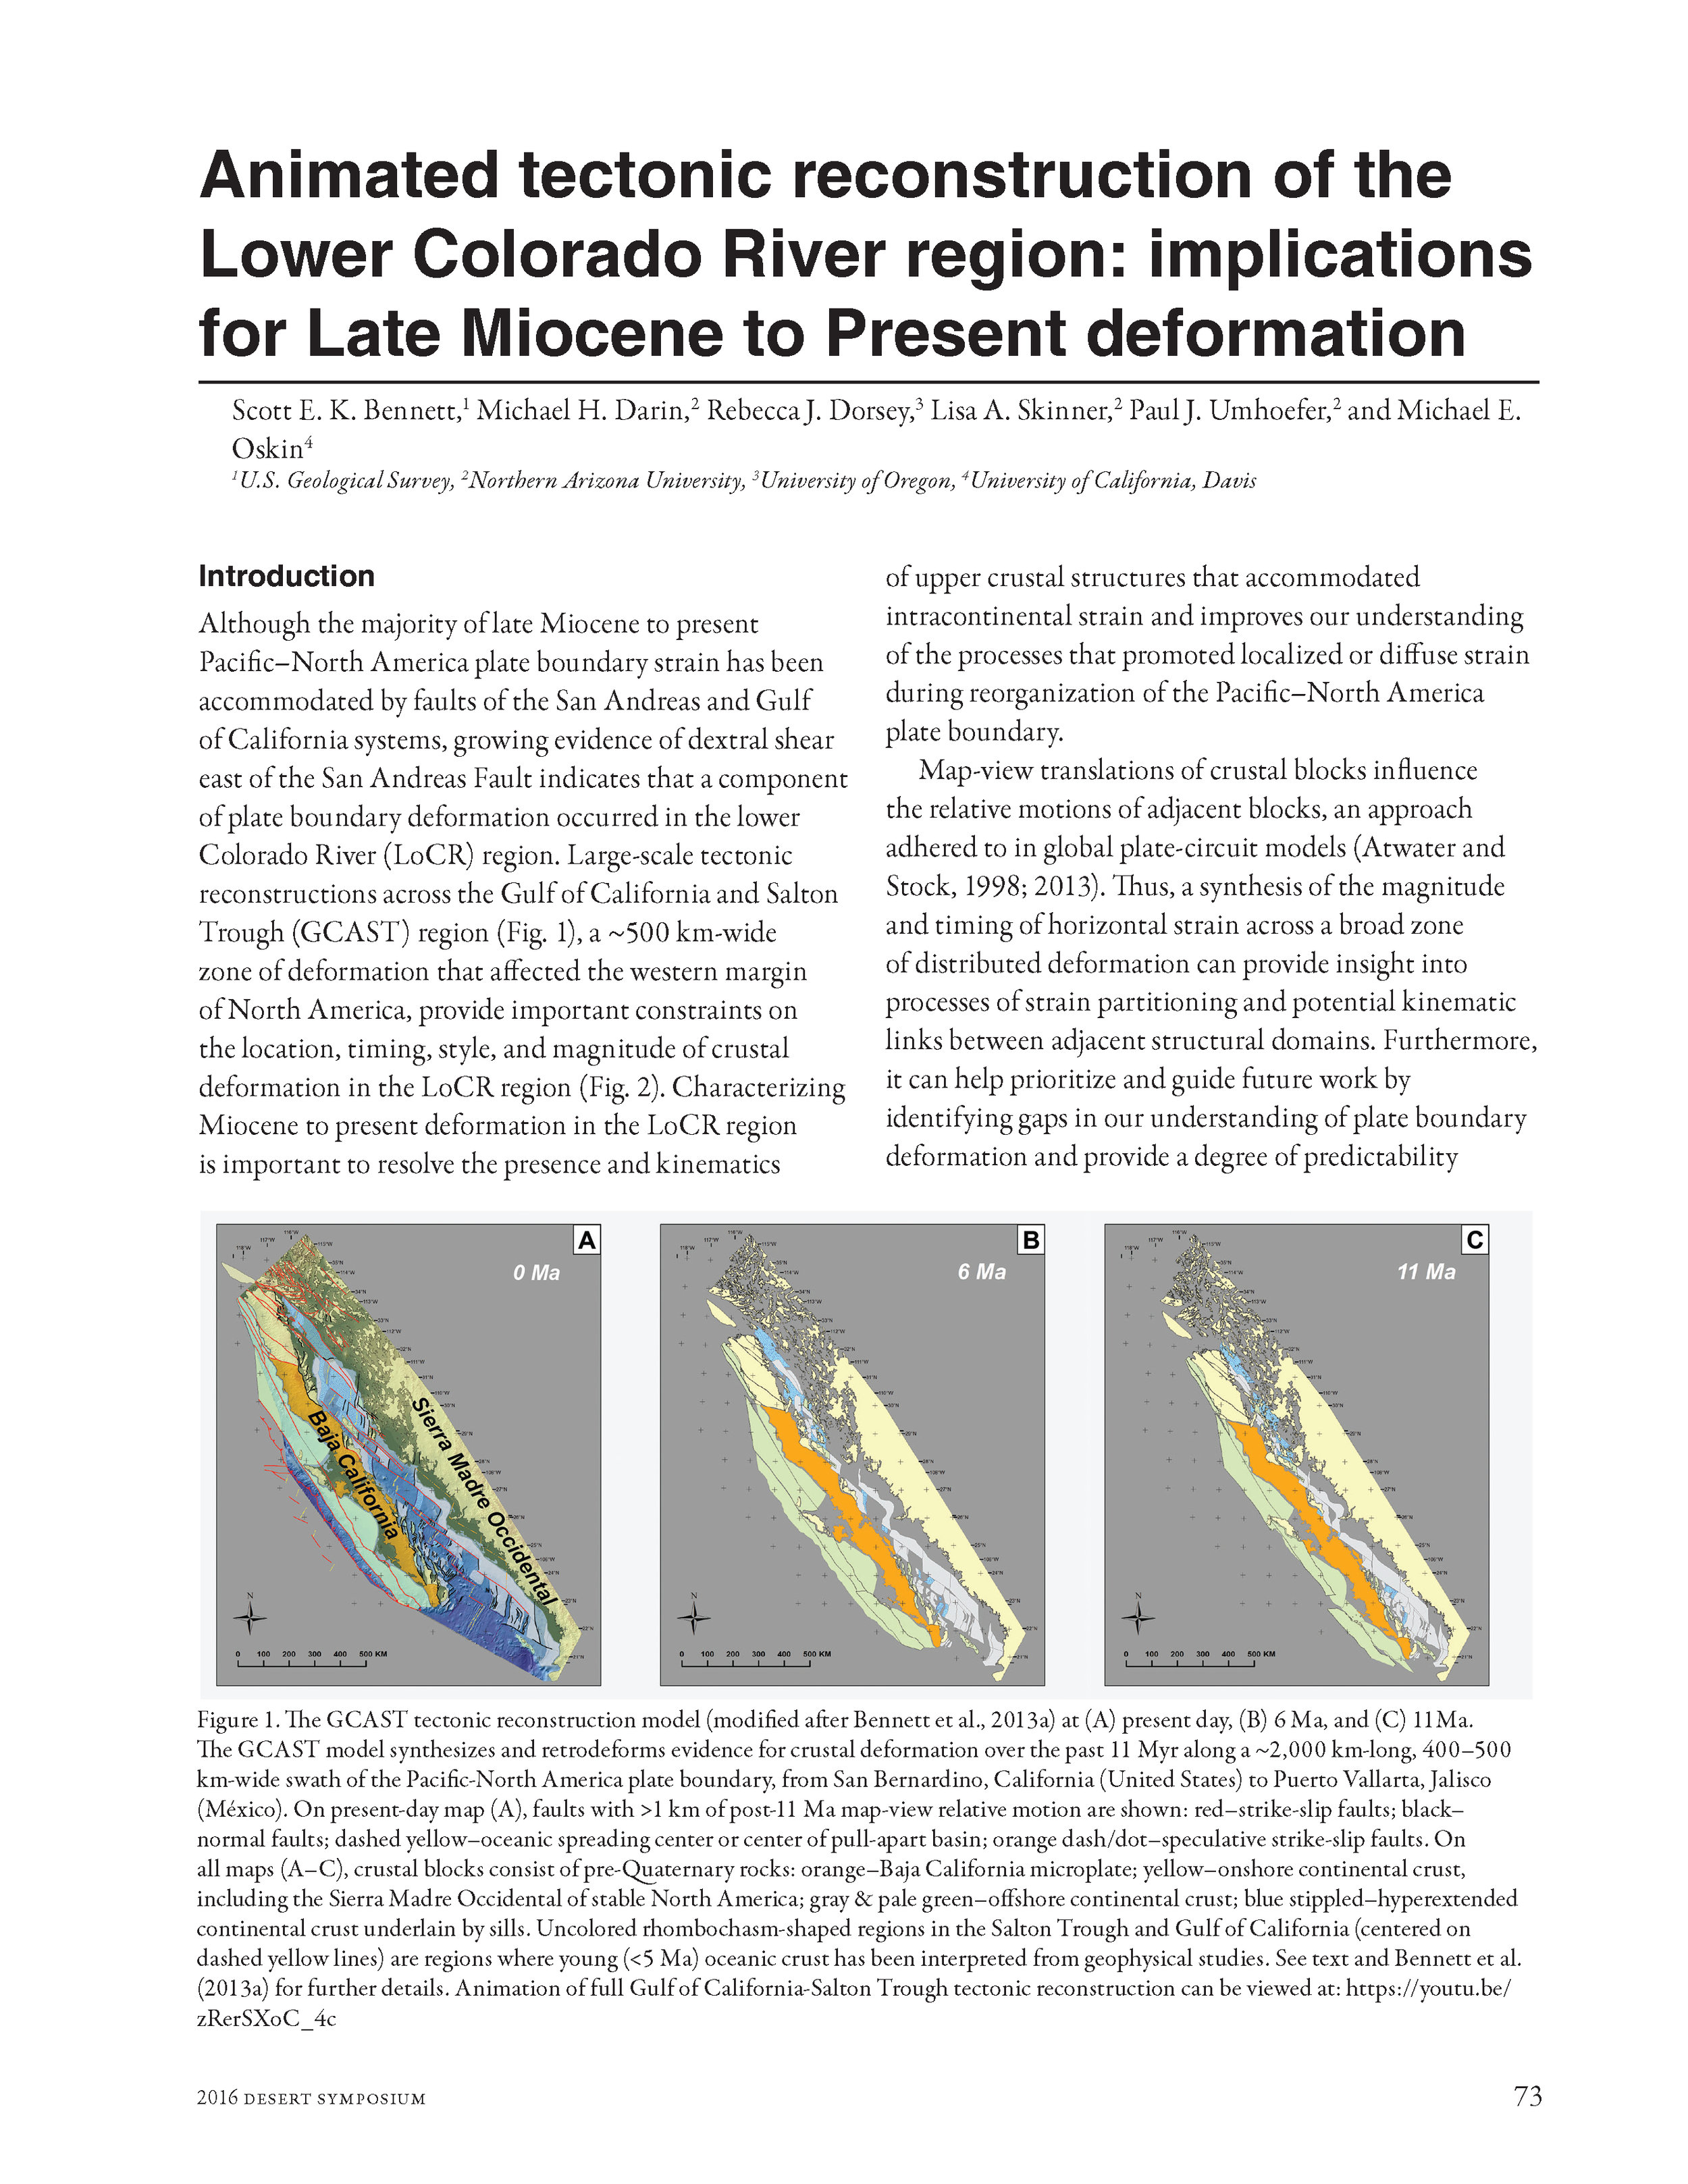 Bennett etal_Animated Tectonic Reconstruction of the Lower Colorado River Region--Implications for Late Miocene to Present Deformation_Desert Symposium_2016.png